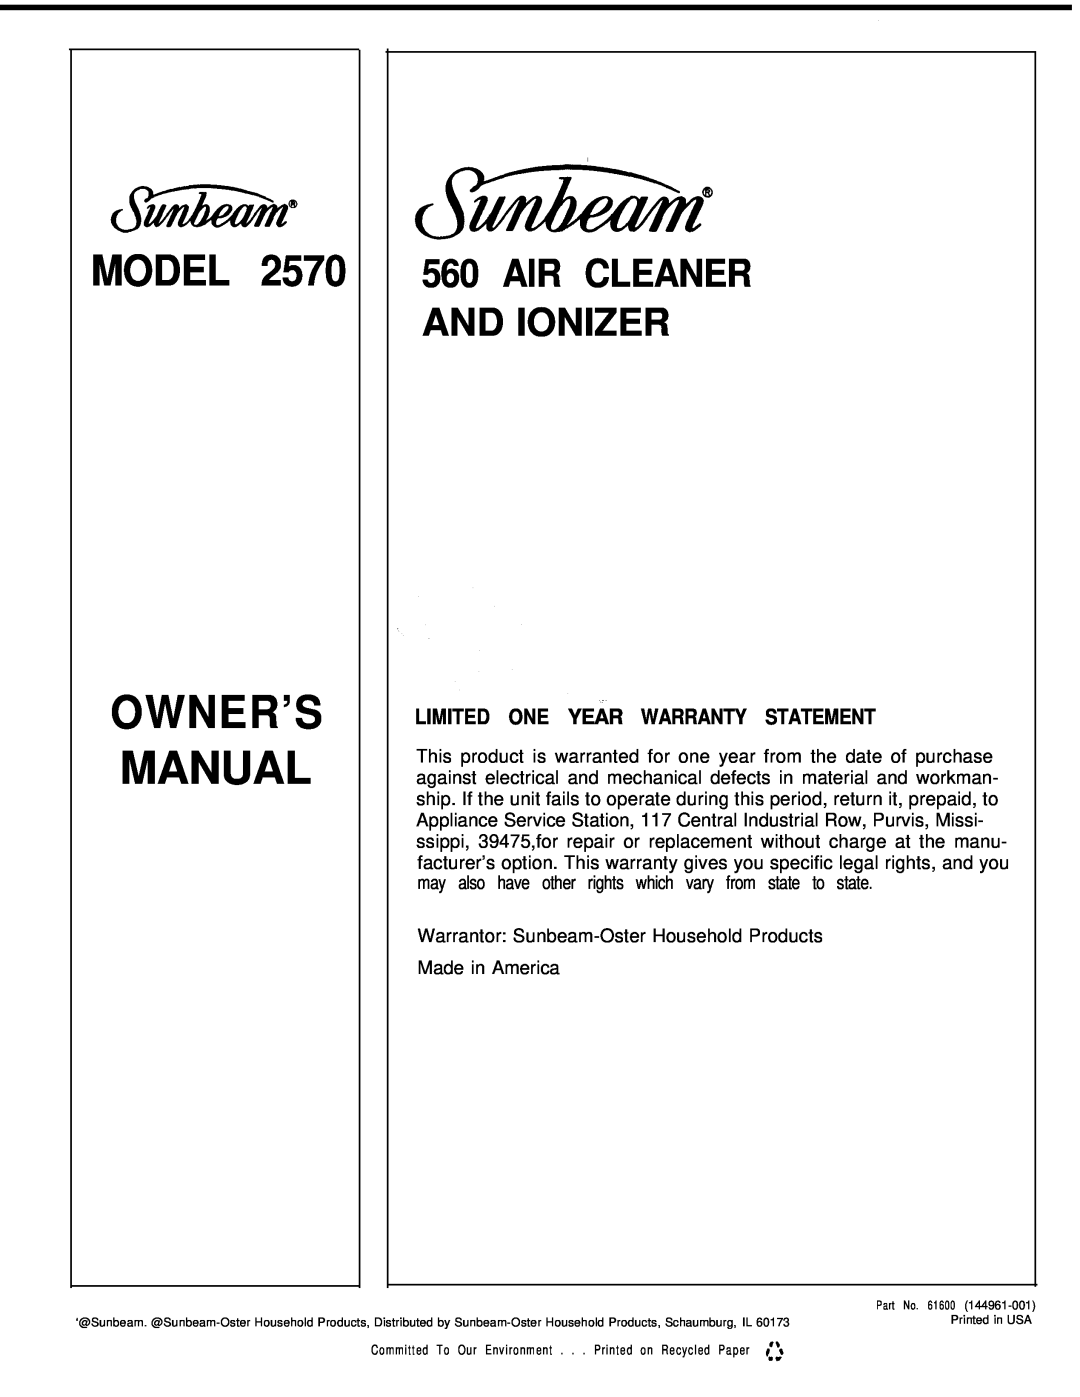 Sunbeam 2570 owner manual Limited One Year Warranty Statement, Model, Air Cleaner And Ionizer 